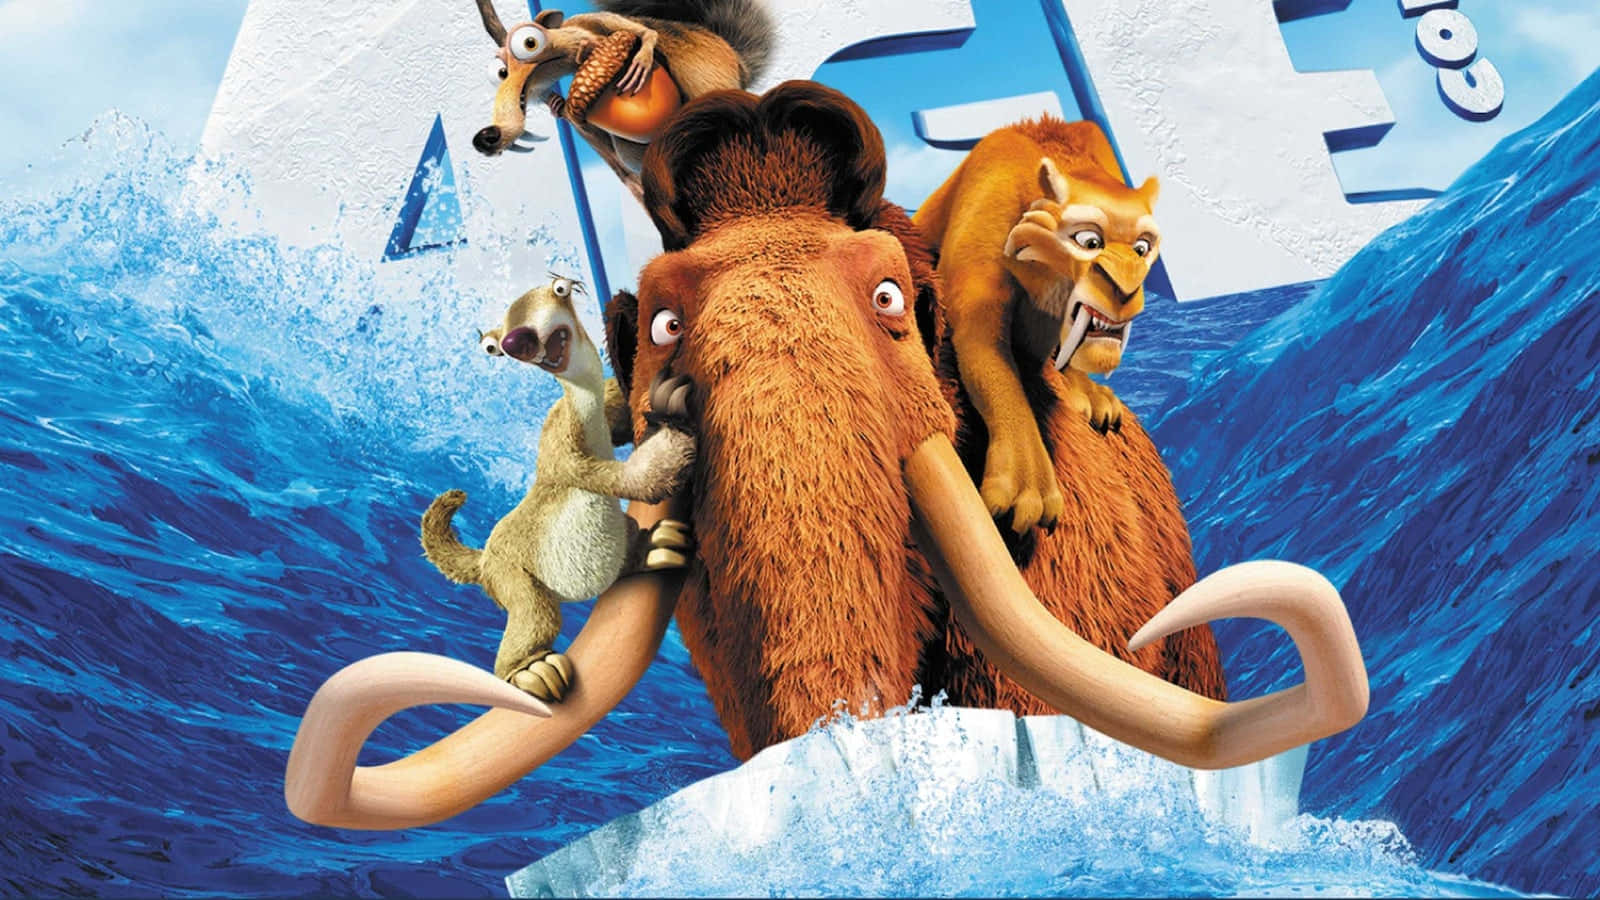 Poster Of Ice Age: Continental Drift Wallpaper